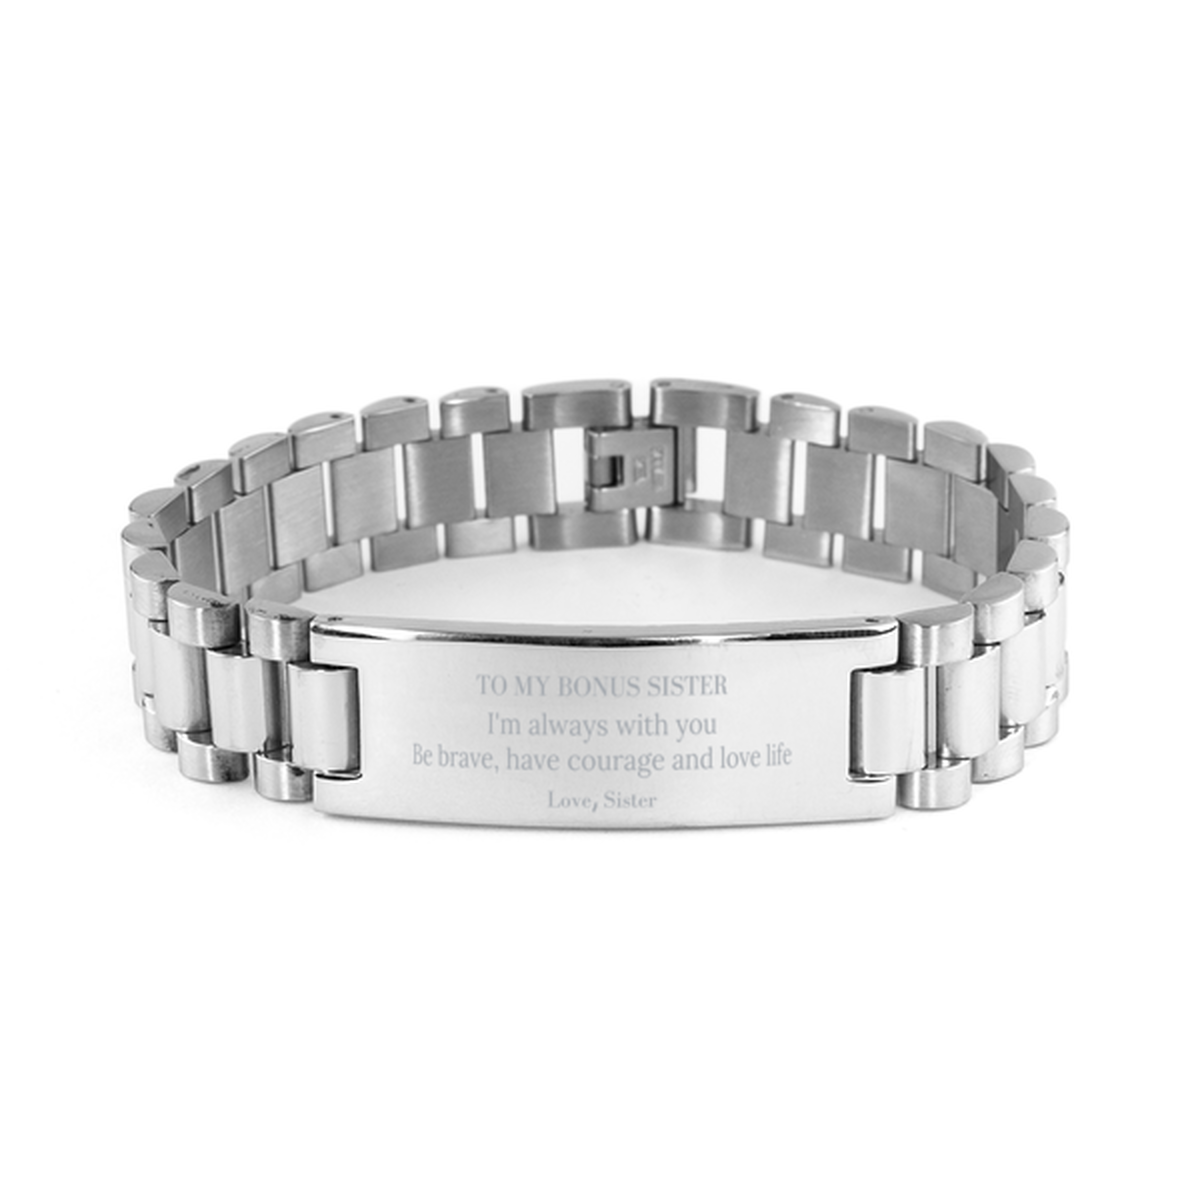 To My Bonus Sister Gifts from Sister, Unique Ladder Stainless Steel Bracelet Inspirational Christmas Birthday Graduation Gifts for Bonus Sister I'm always with you. Be brave, have courage and love life. Love, Sister